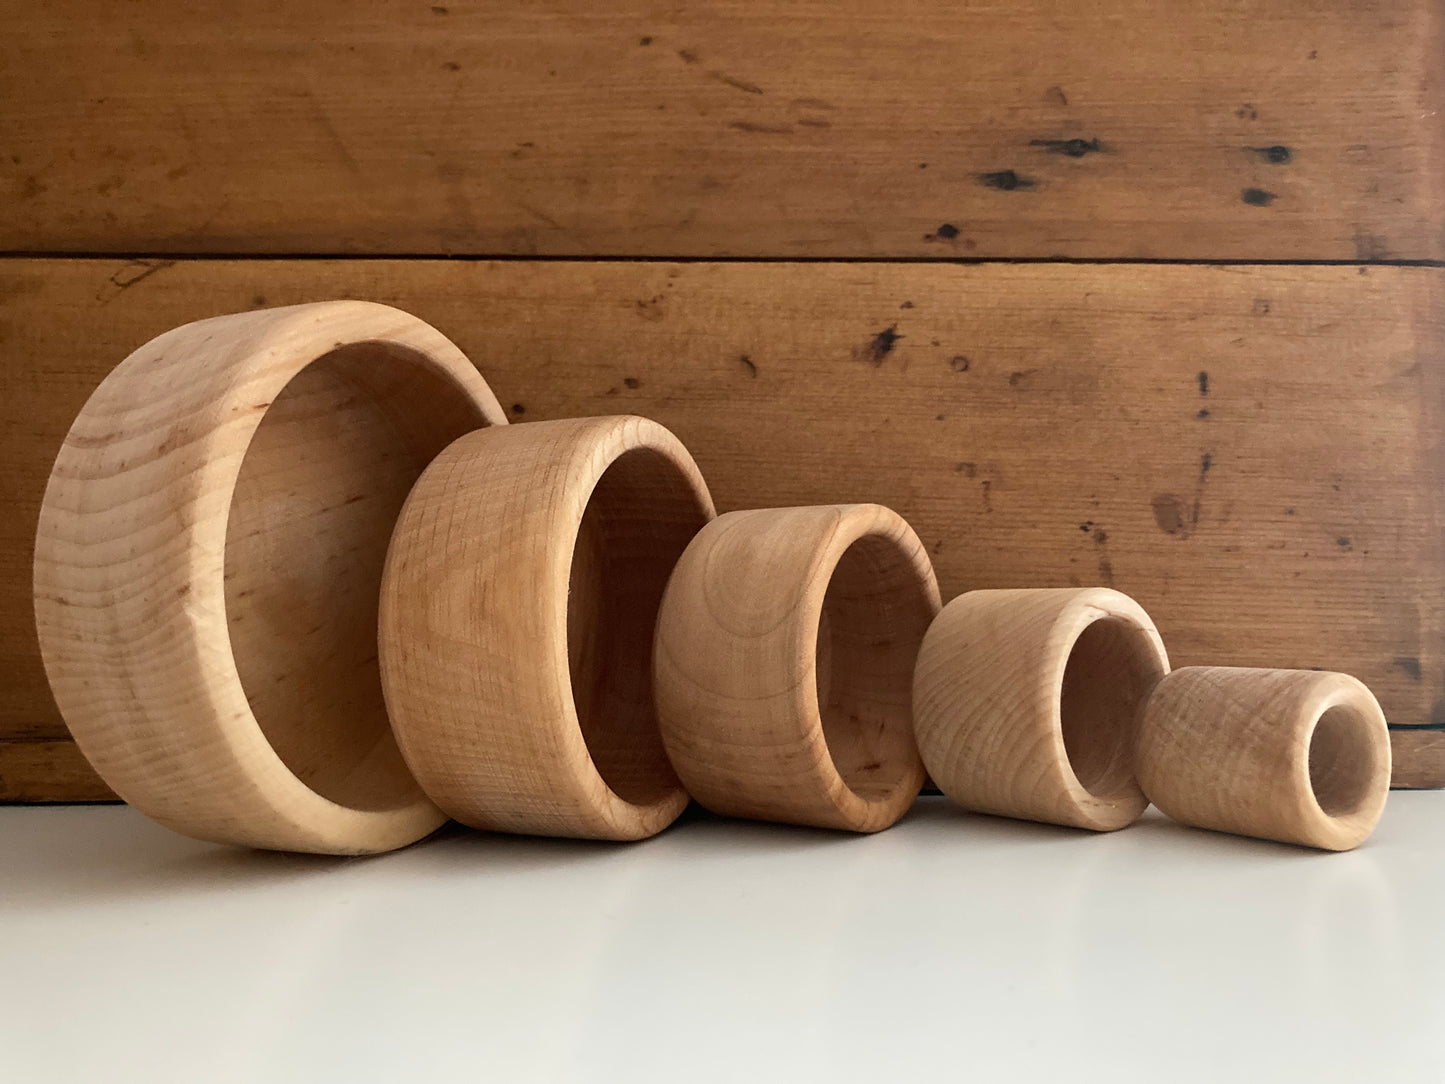 Wooden Toy - STACKING BOWLS, 5 bowls!